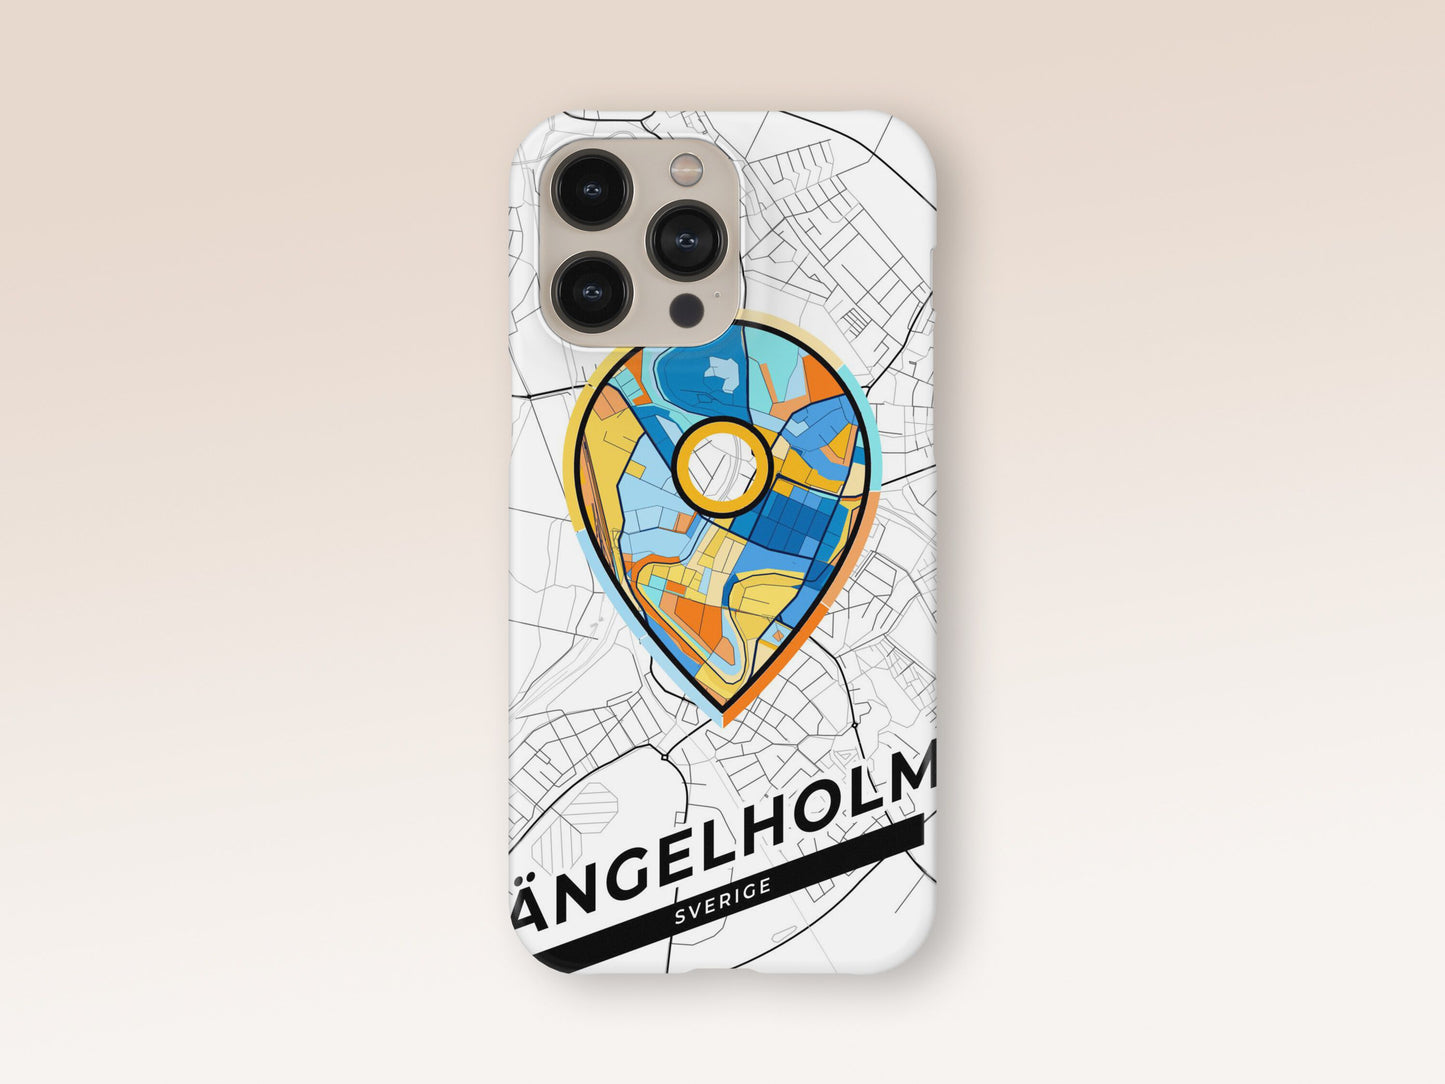 Ängelholm Sweden slim phone case with colorful icon. Birthday, wedding or housewarming gift. Couple match cases. 1